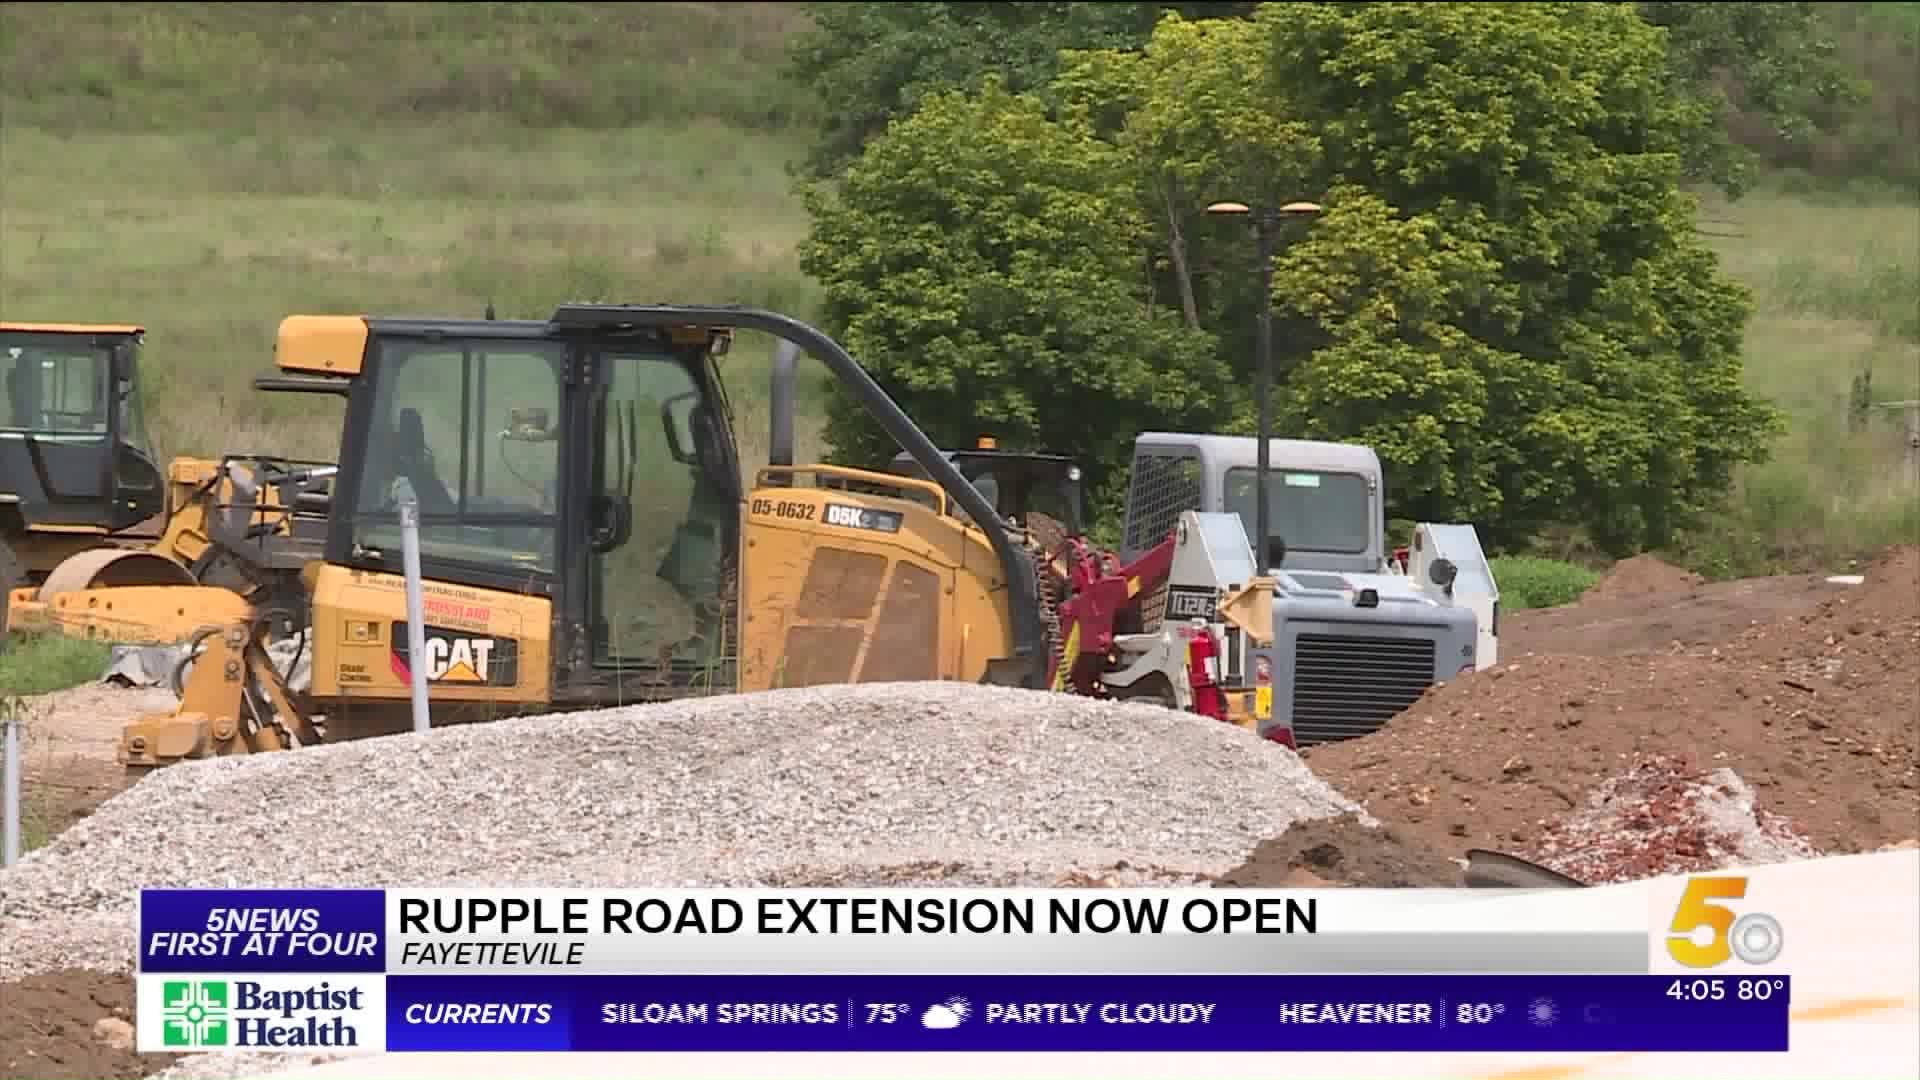 Rupple Road Extension Now Open